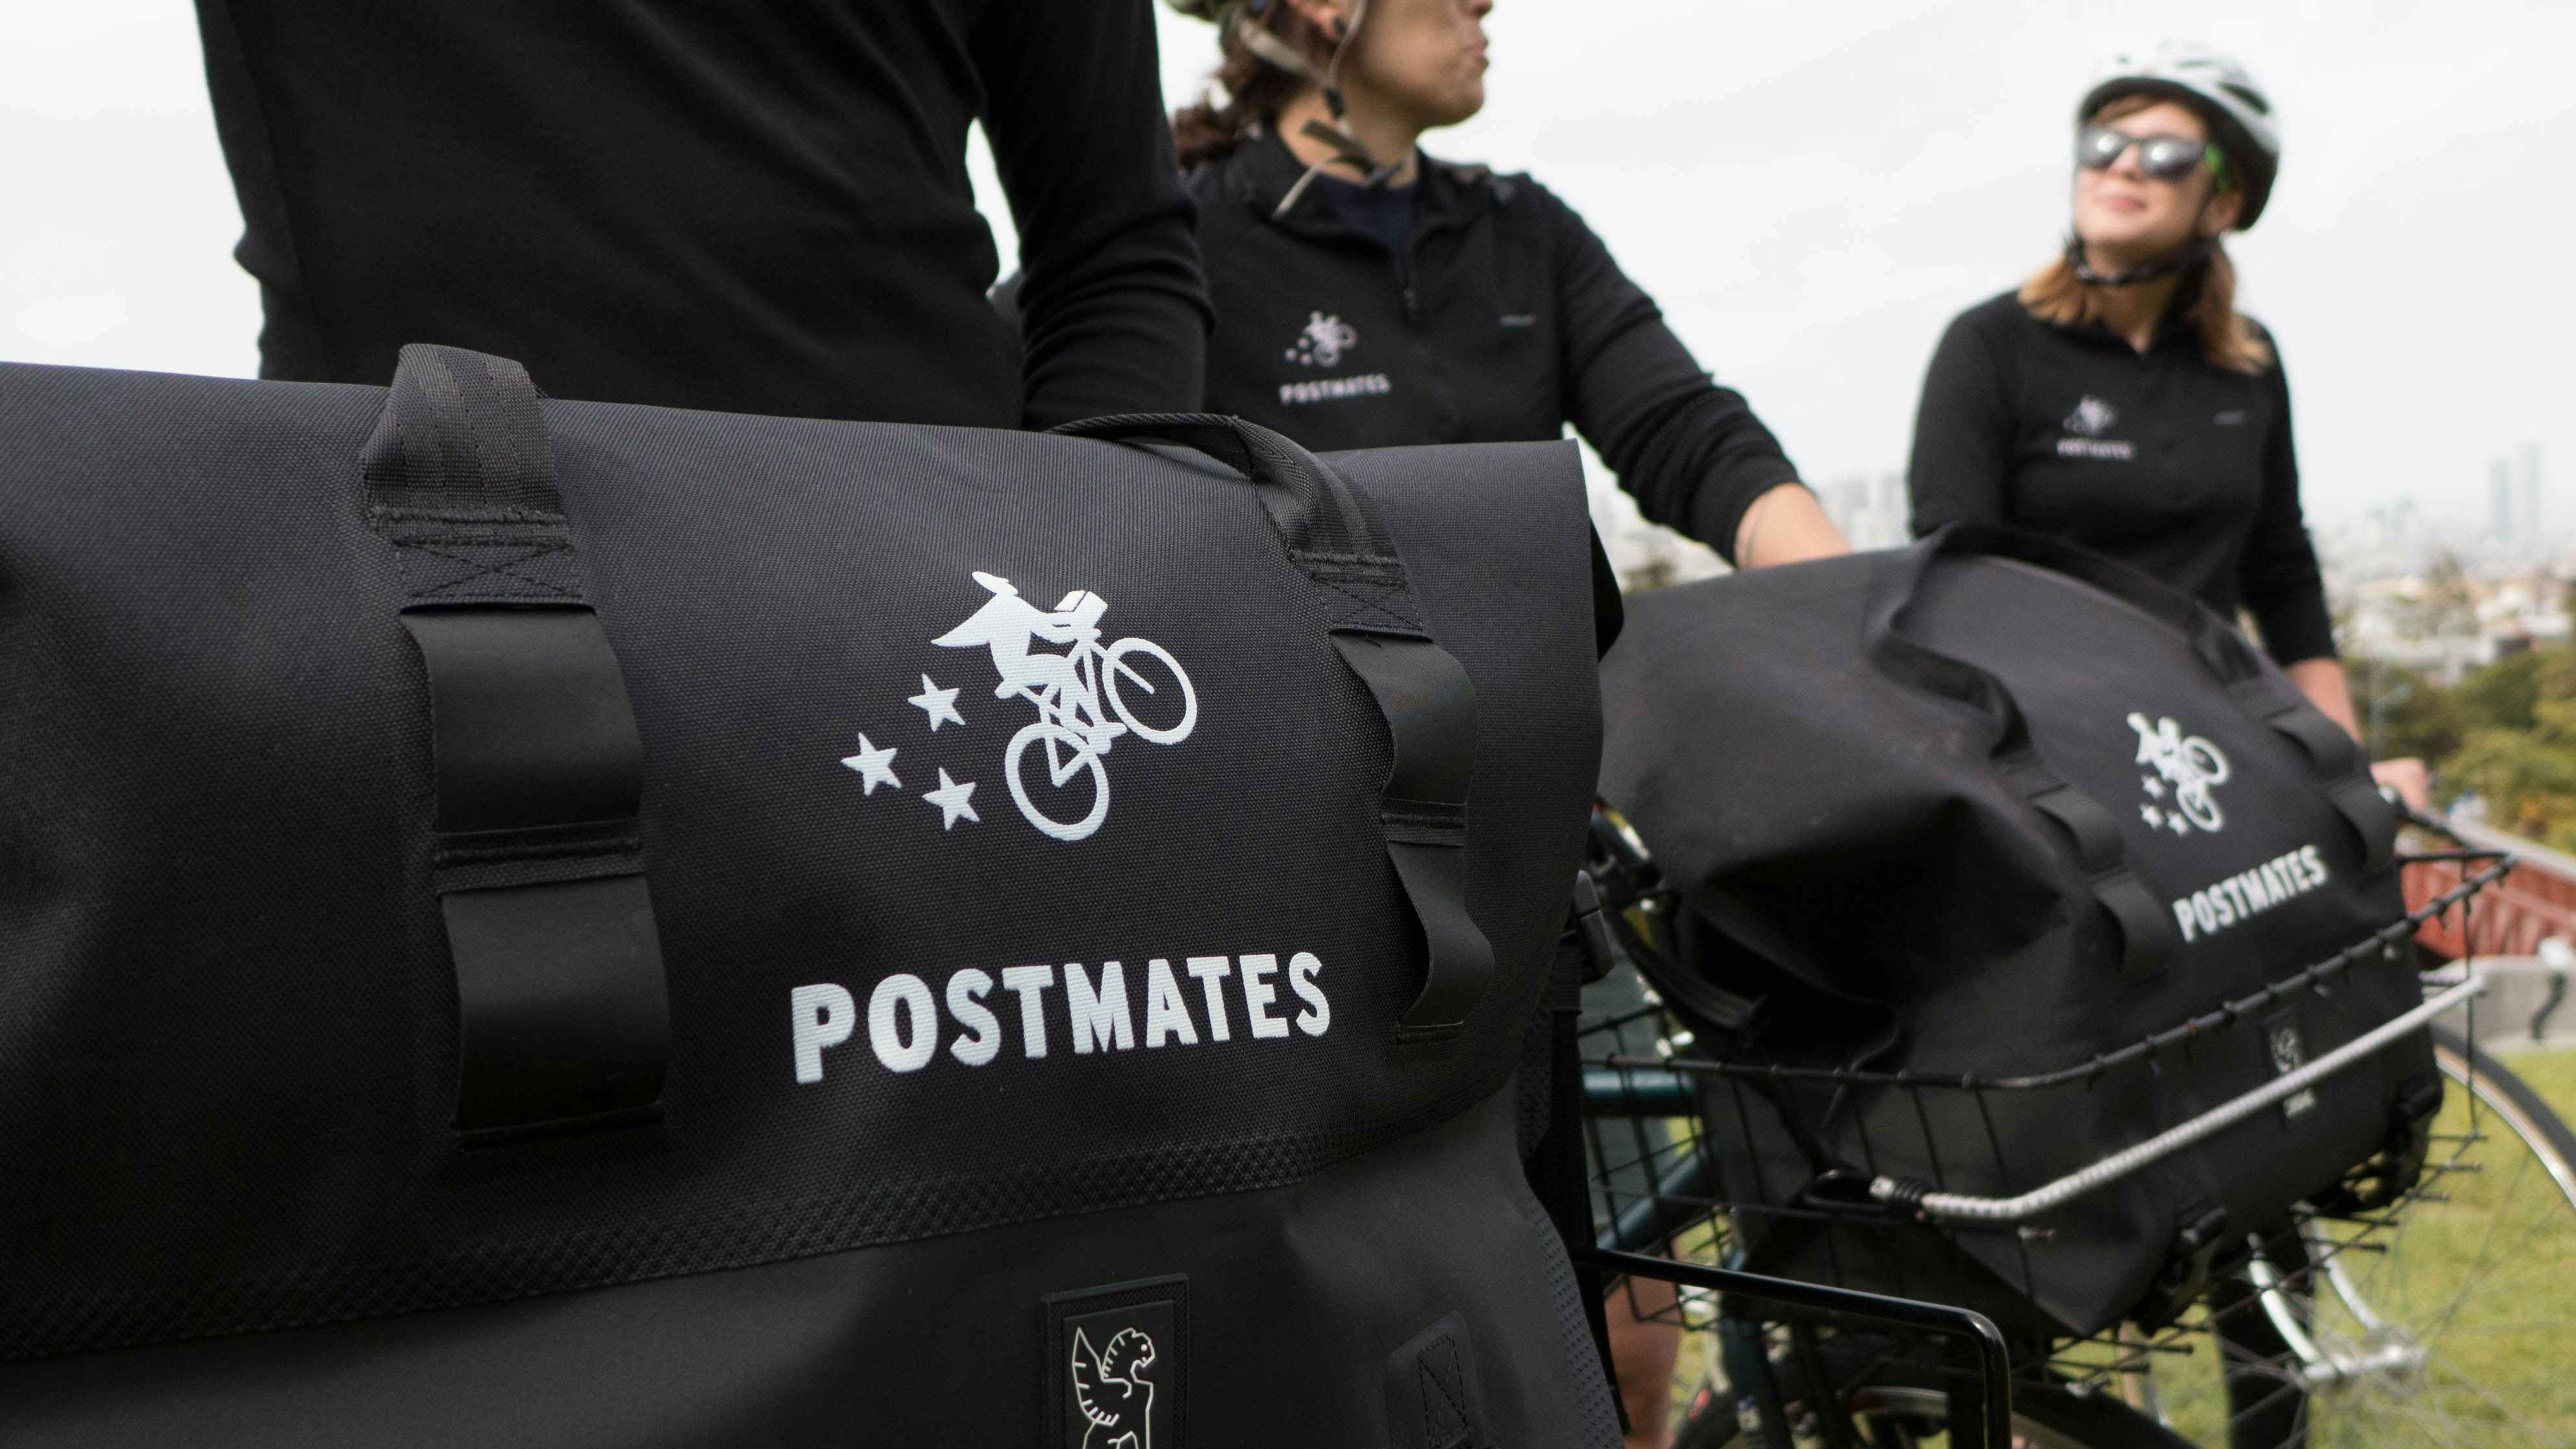 Three people on bicycles with Postmates food delivery bags in the bicycles' baskets.